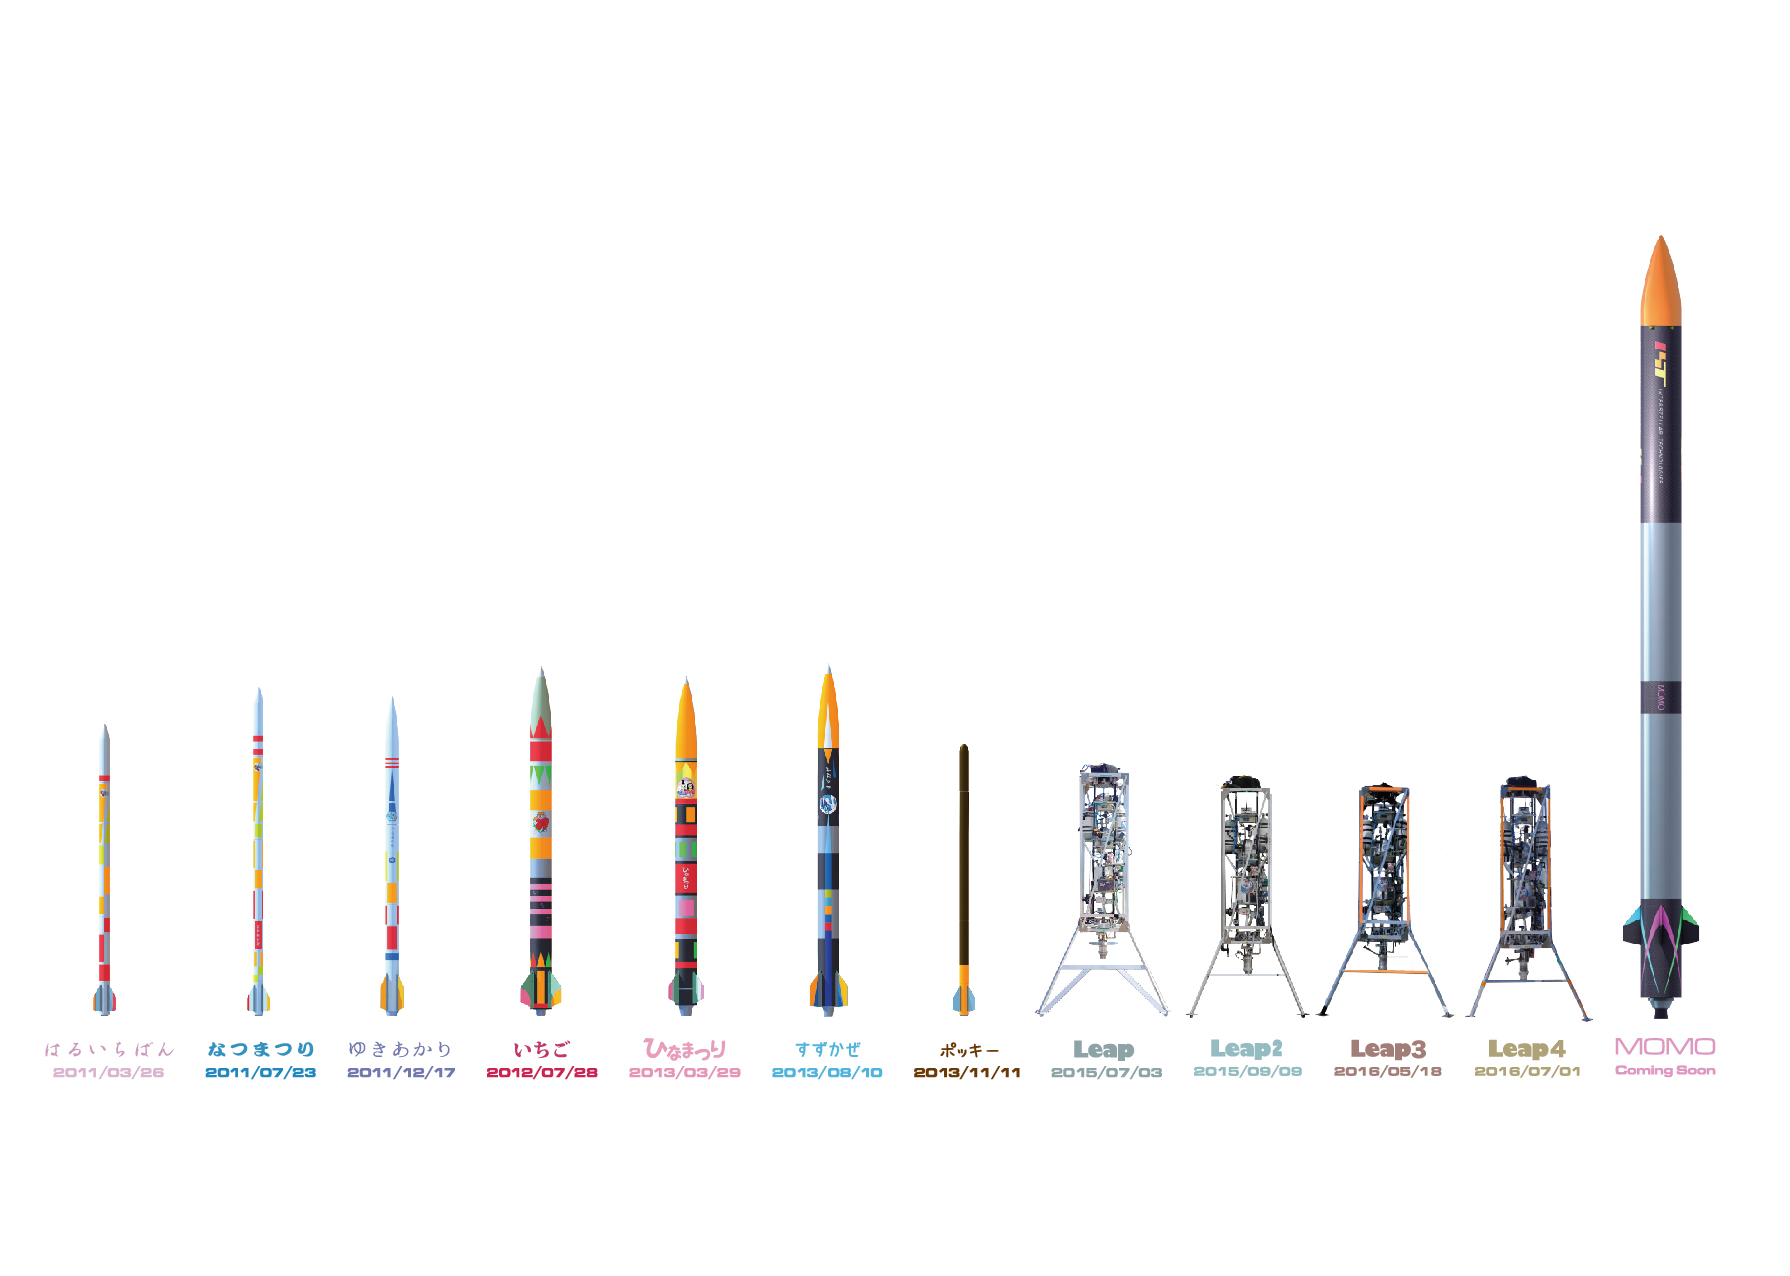 OUR ROCKETS